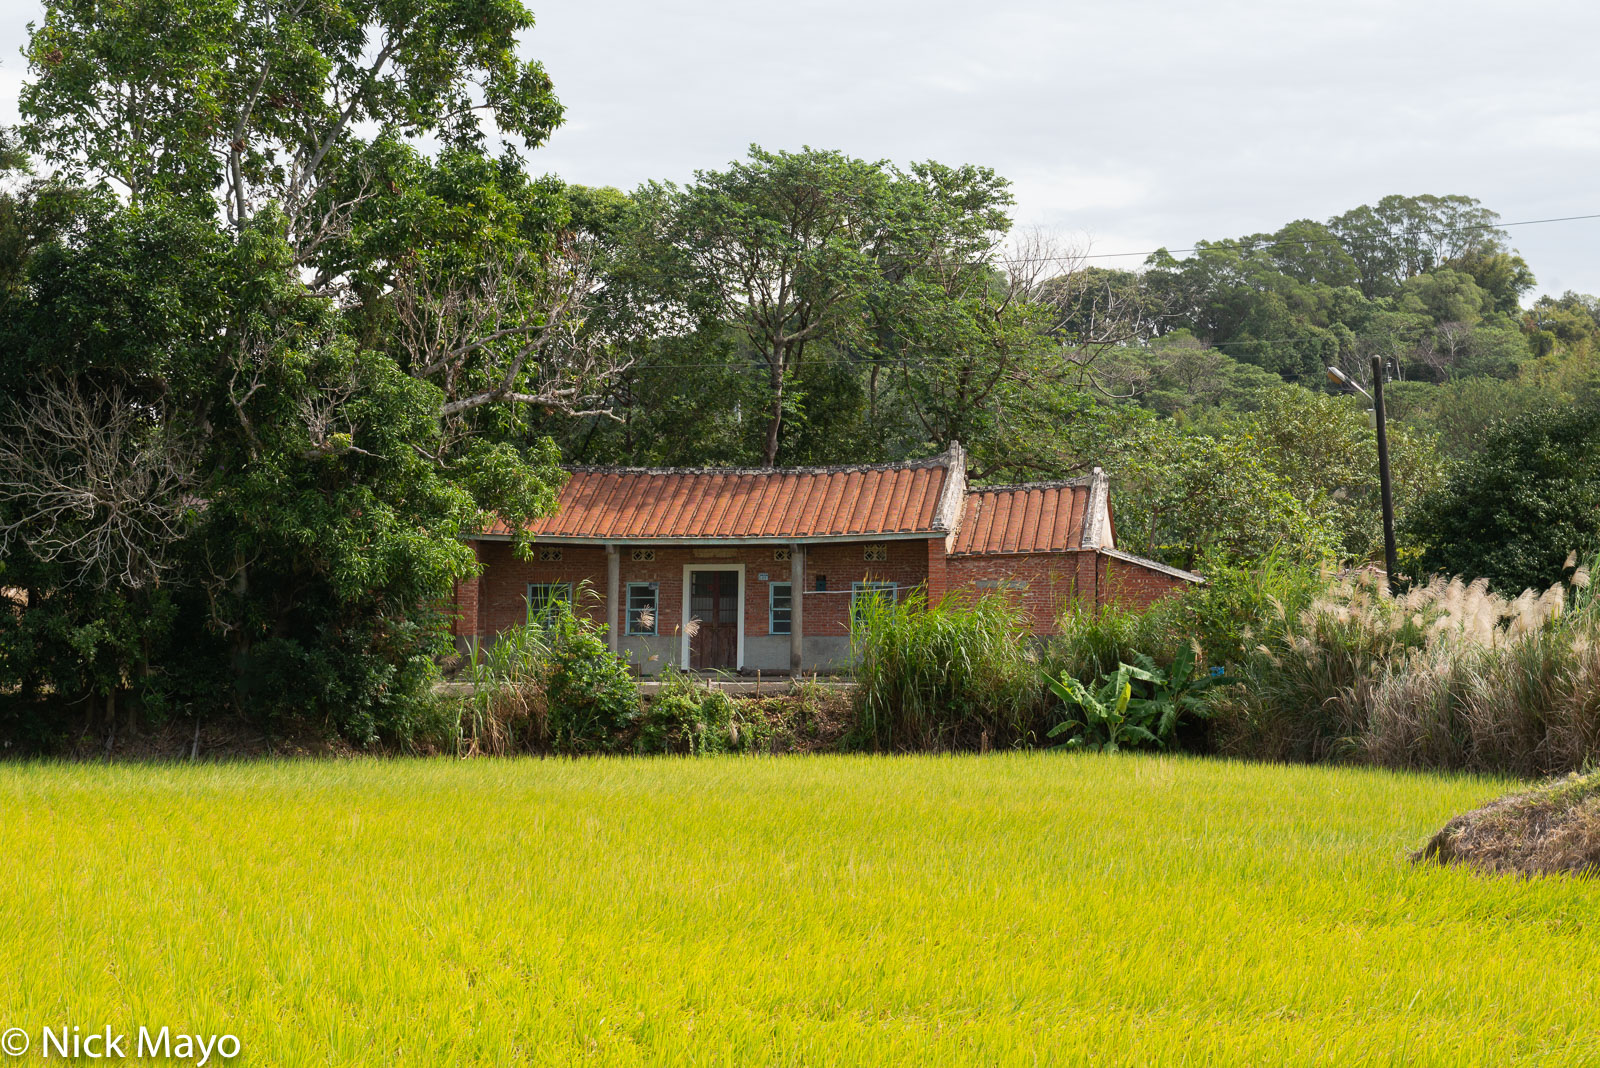 An abandoned red brick farmhouse behind paddy rice fields in Baoshan district.